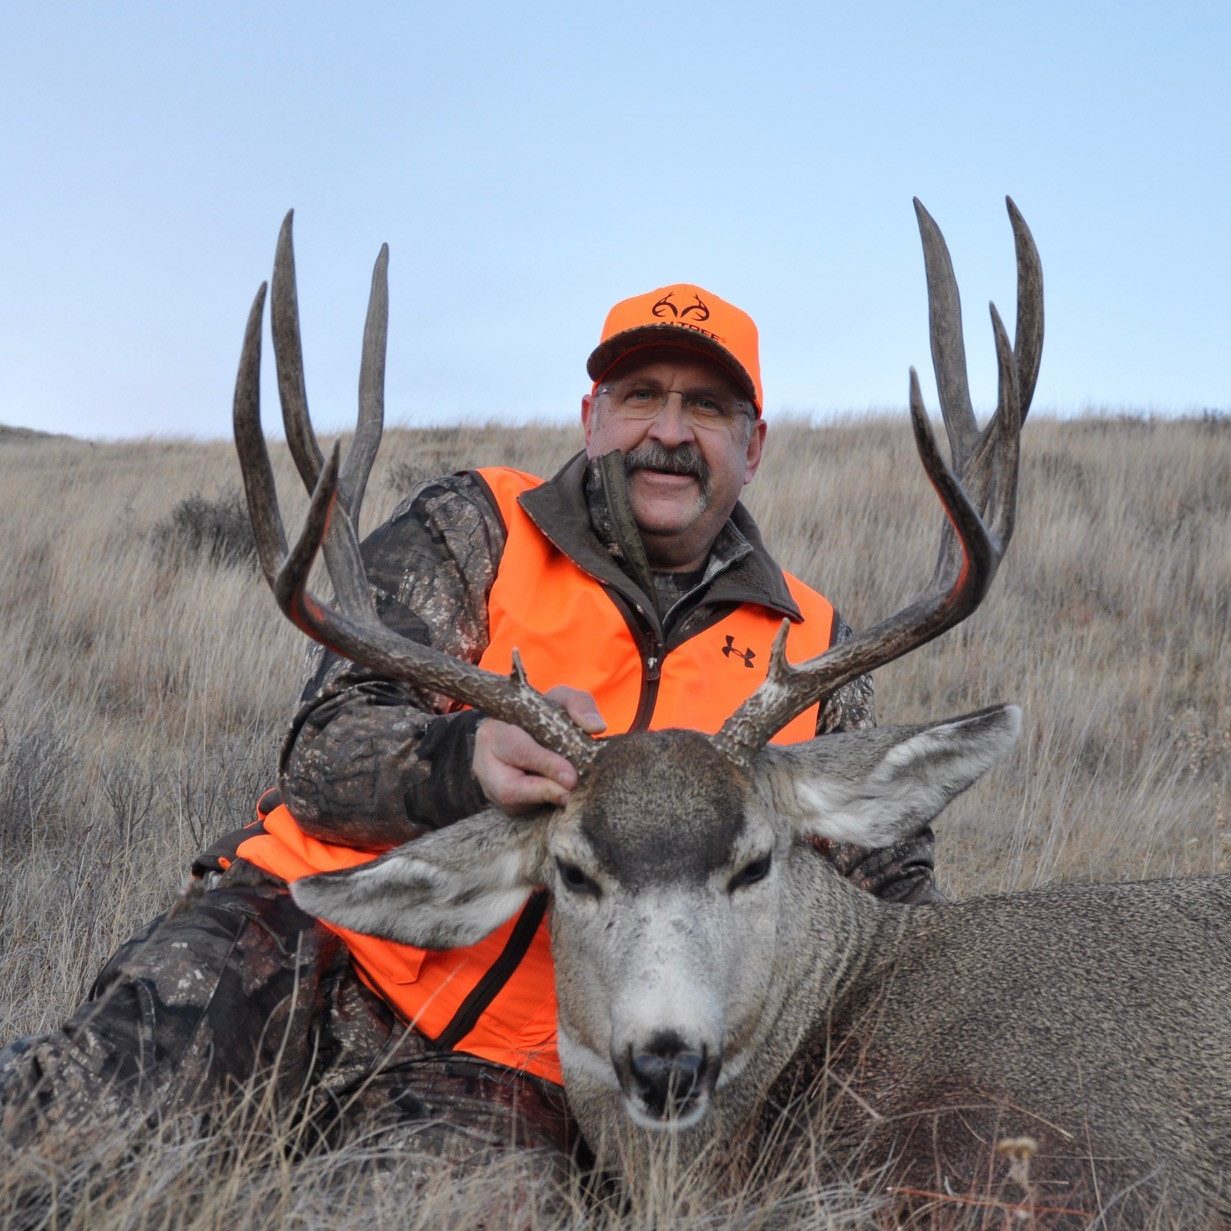 Mike Hungle, Author at North American Deer Hunter